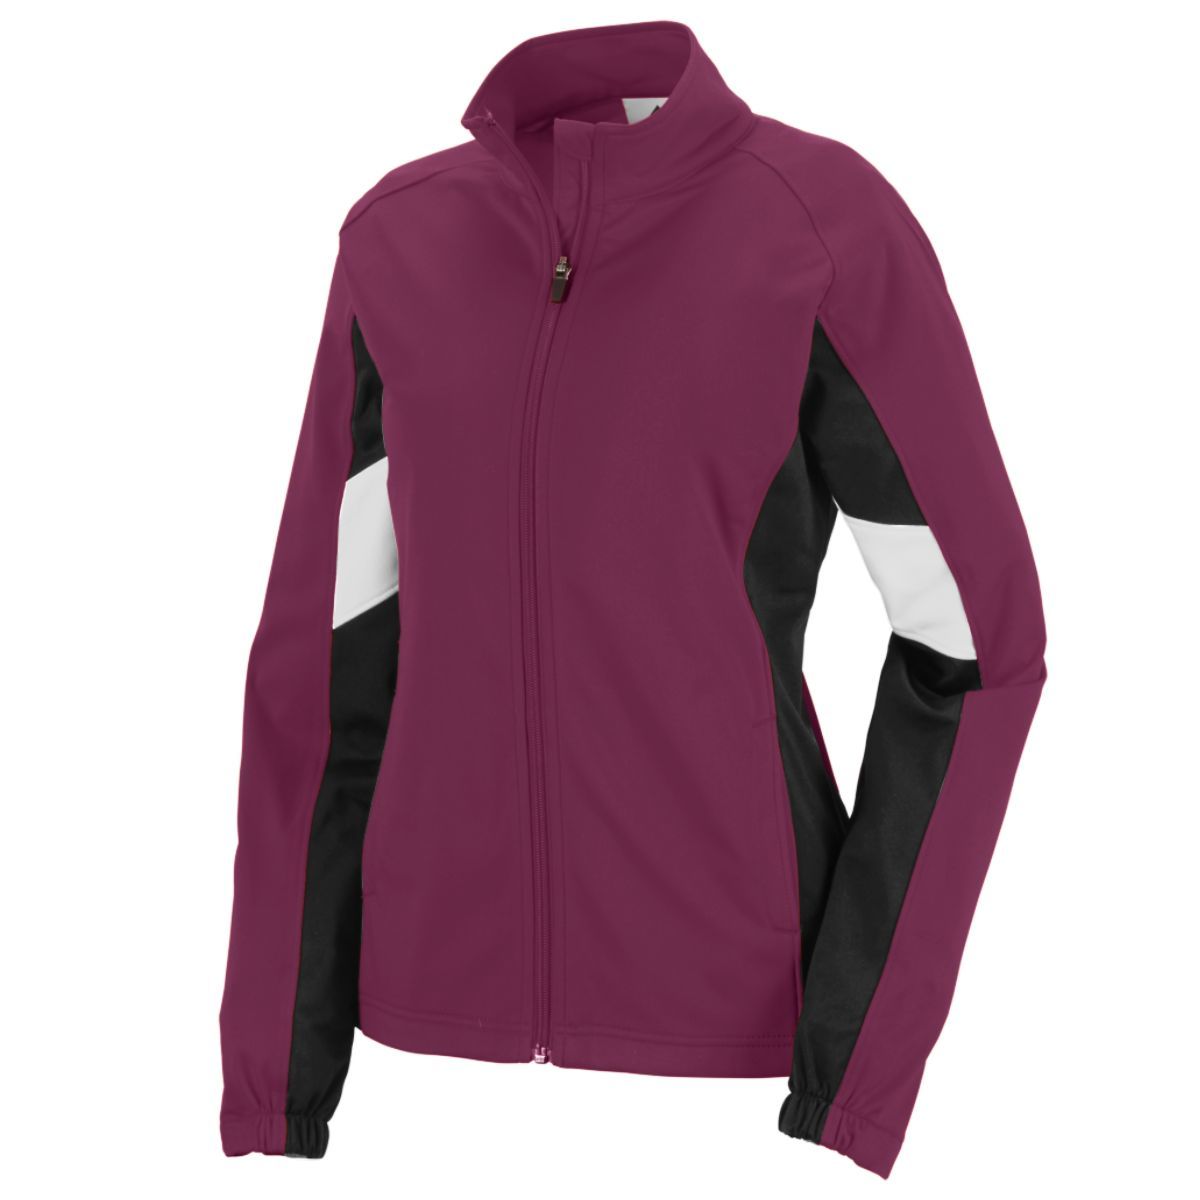 Augusta Sportswear Ladies Tour De Force Jacket in Maroon/Black/White  -Part of the Ladies, Ladies-Jacket, Augusta-Products, Outerwear product lines at KanaleyCreations.com